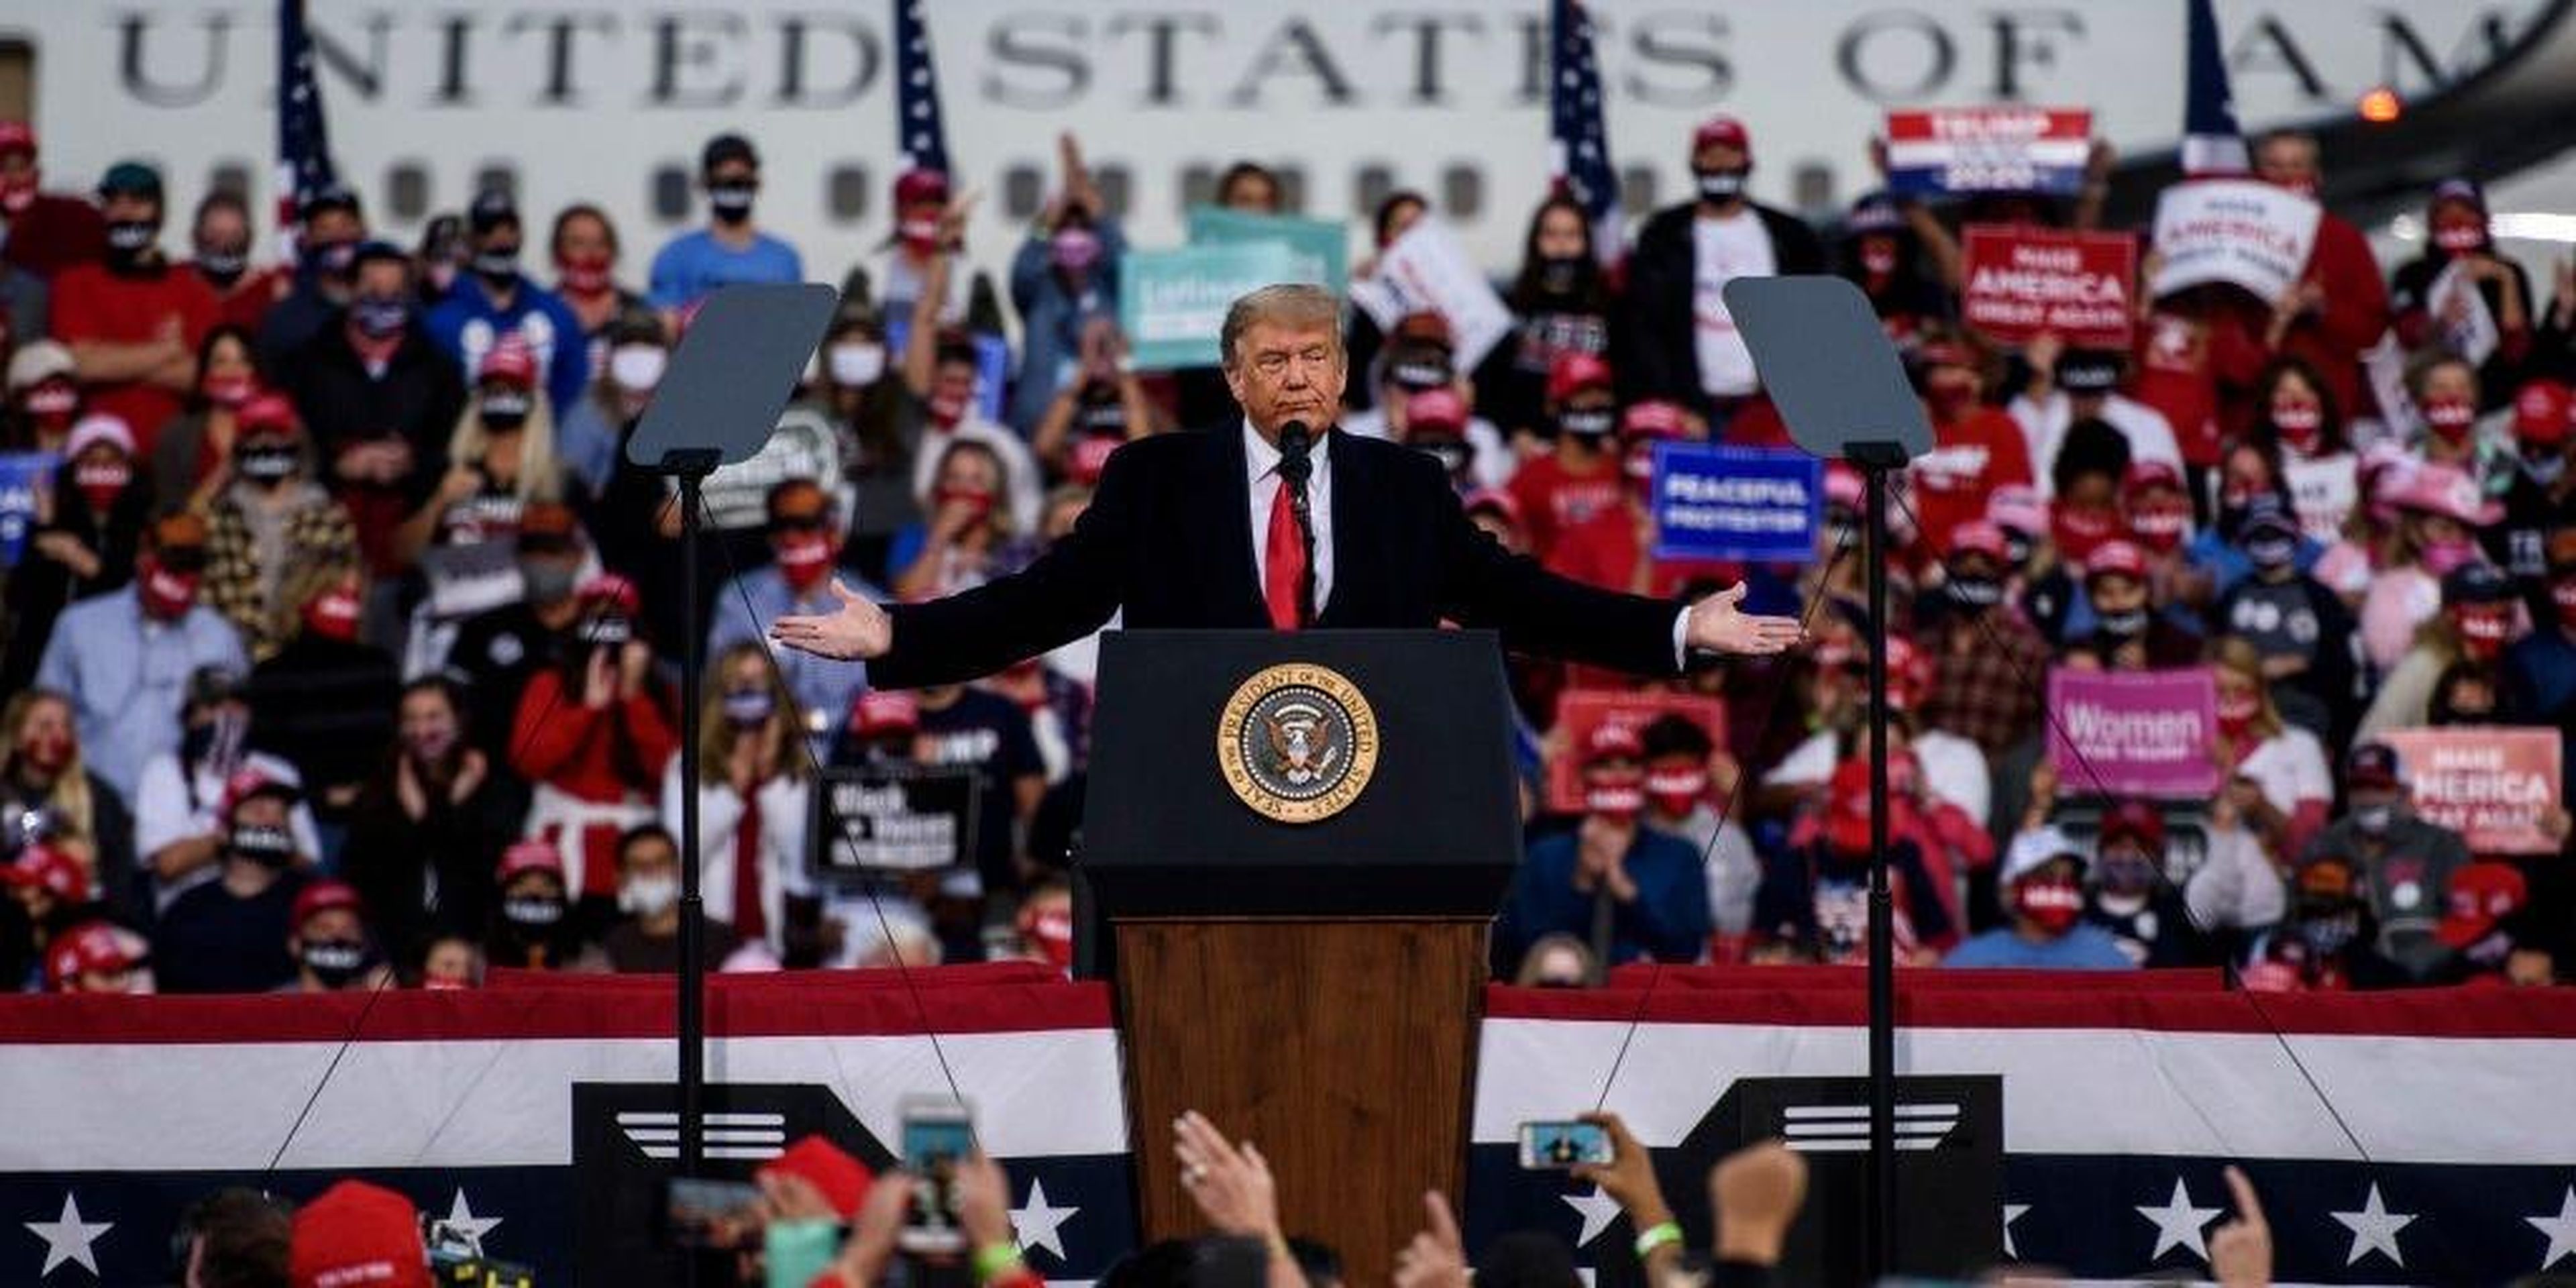 trump fay FAYETTEVILLE, NC - SEPTEMBER 19: President Donald Trump addresses a crowd at the Fayetteville Regional Airport on September 19, 2020 in Fayetteville, North Carolina. Thousands of people joined to hear the president during the Make America Great